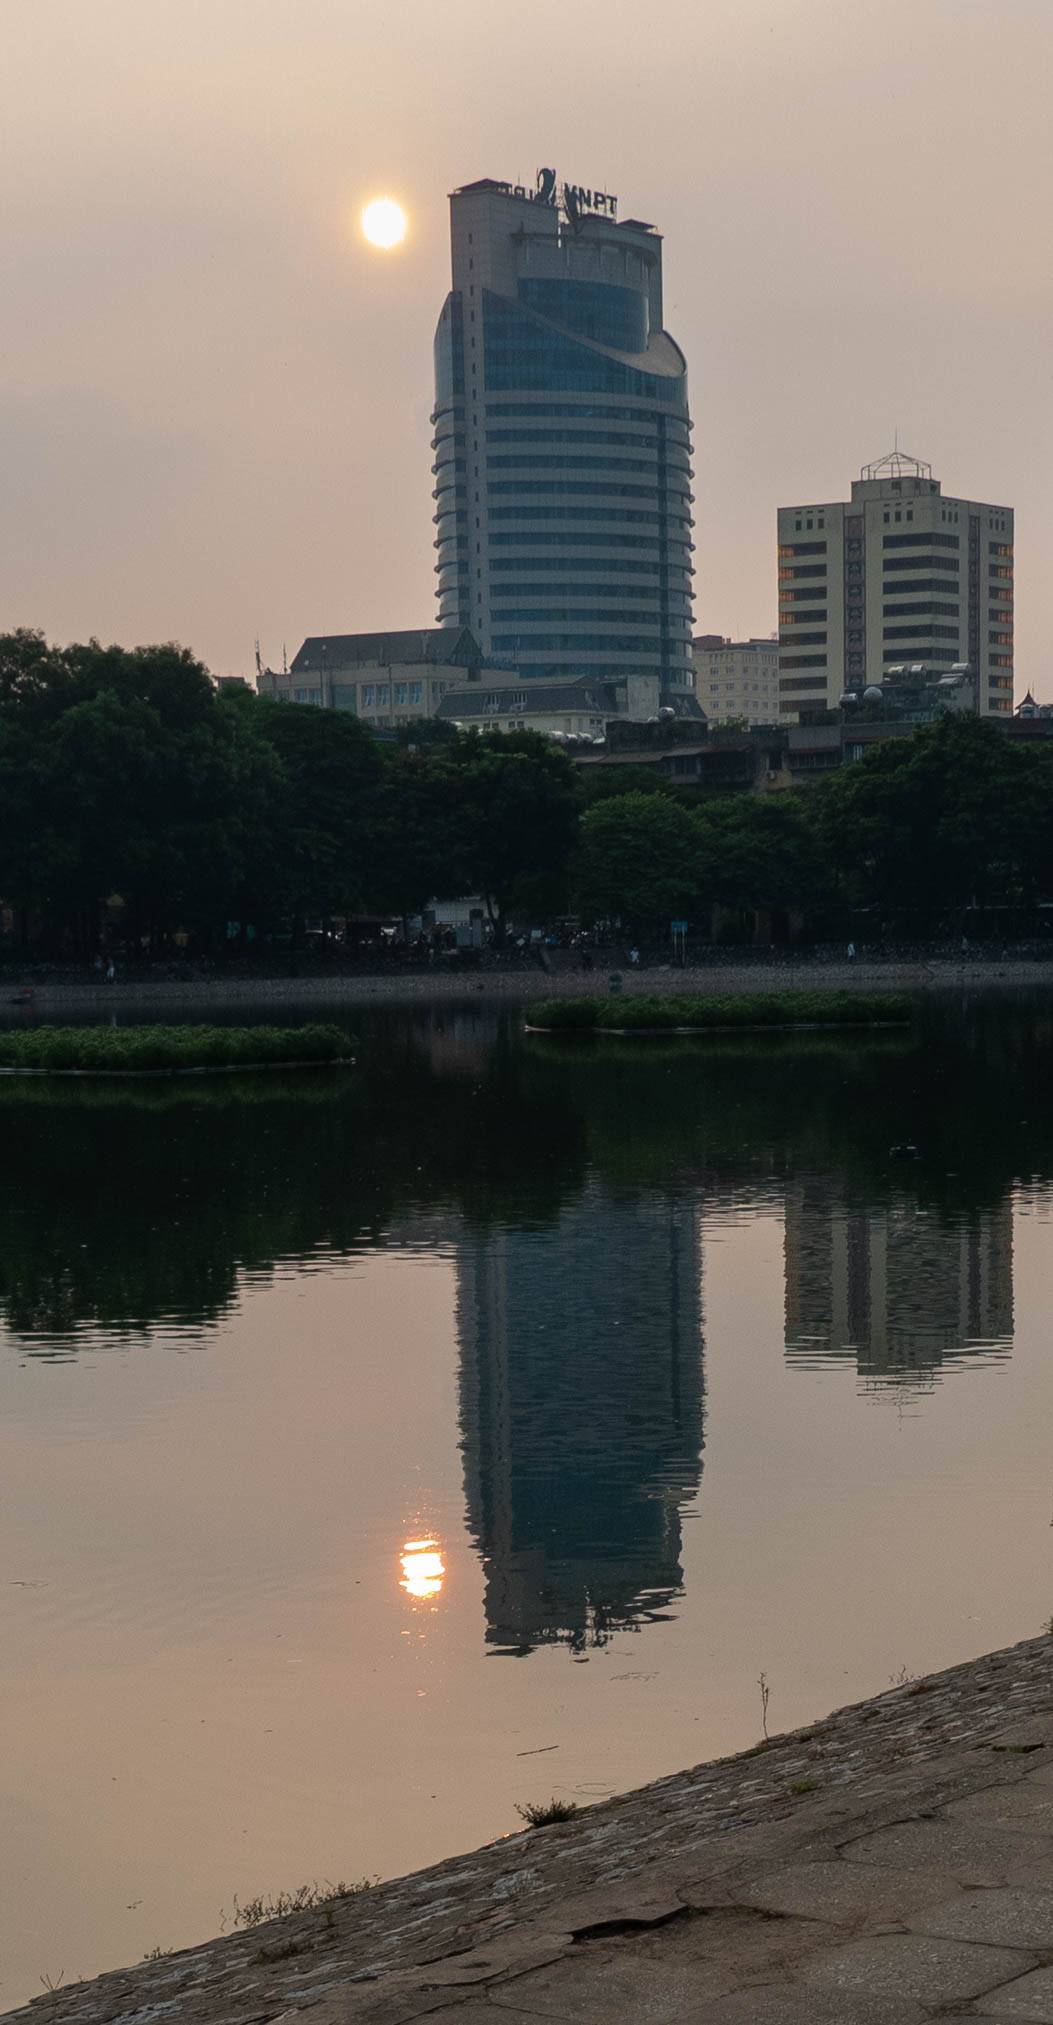 Building and sun reflecting in calm lake. Sun is to the left of the tall building.